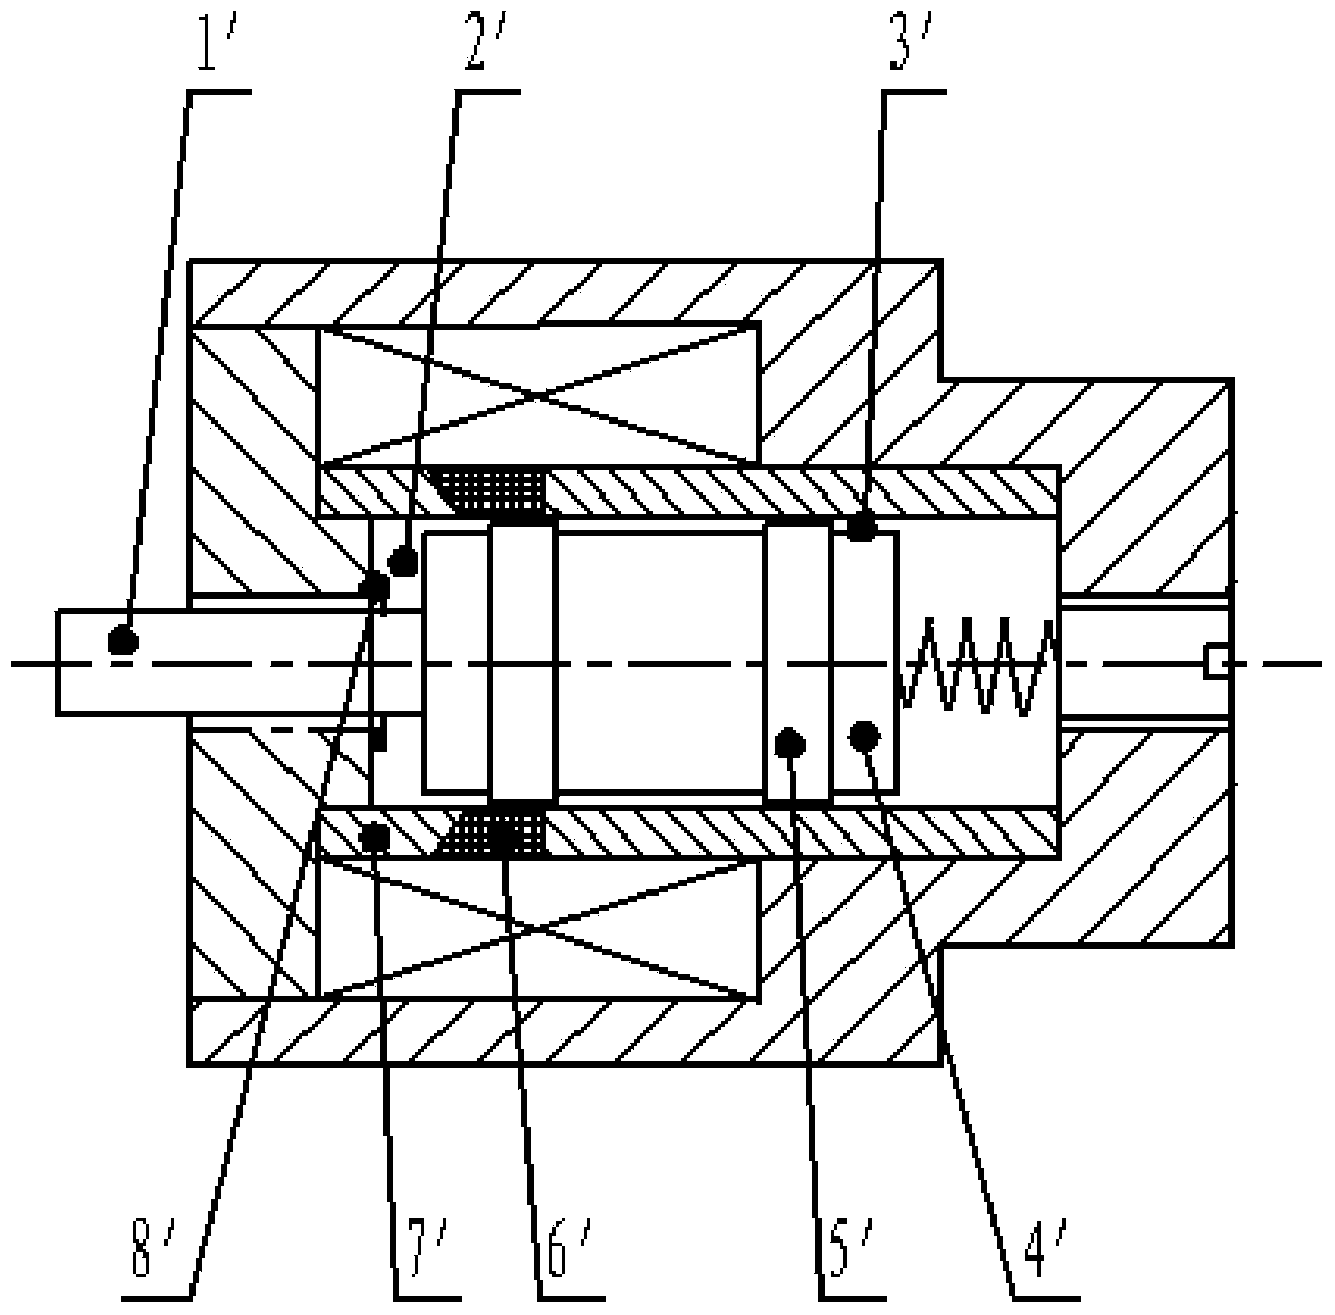 Direct-acting bidirectional proportion electromagnet